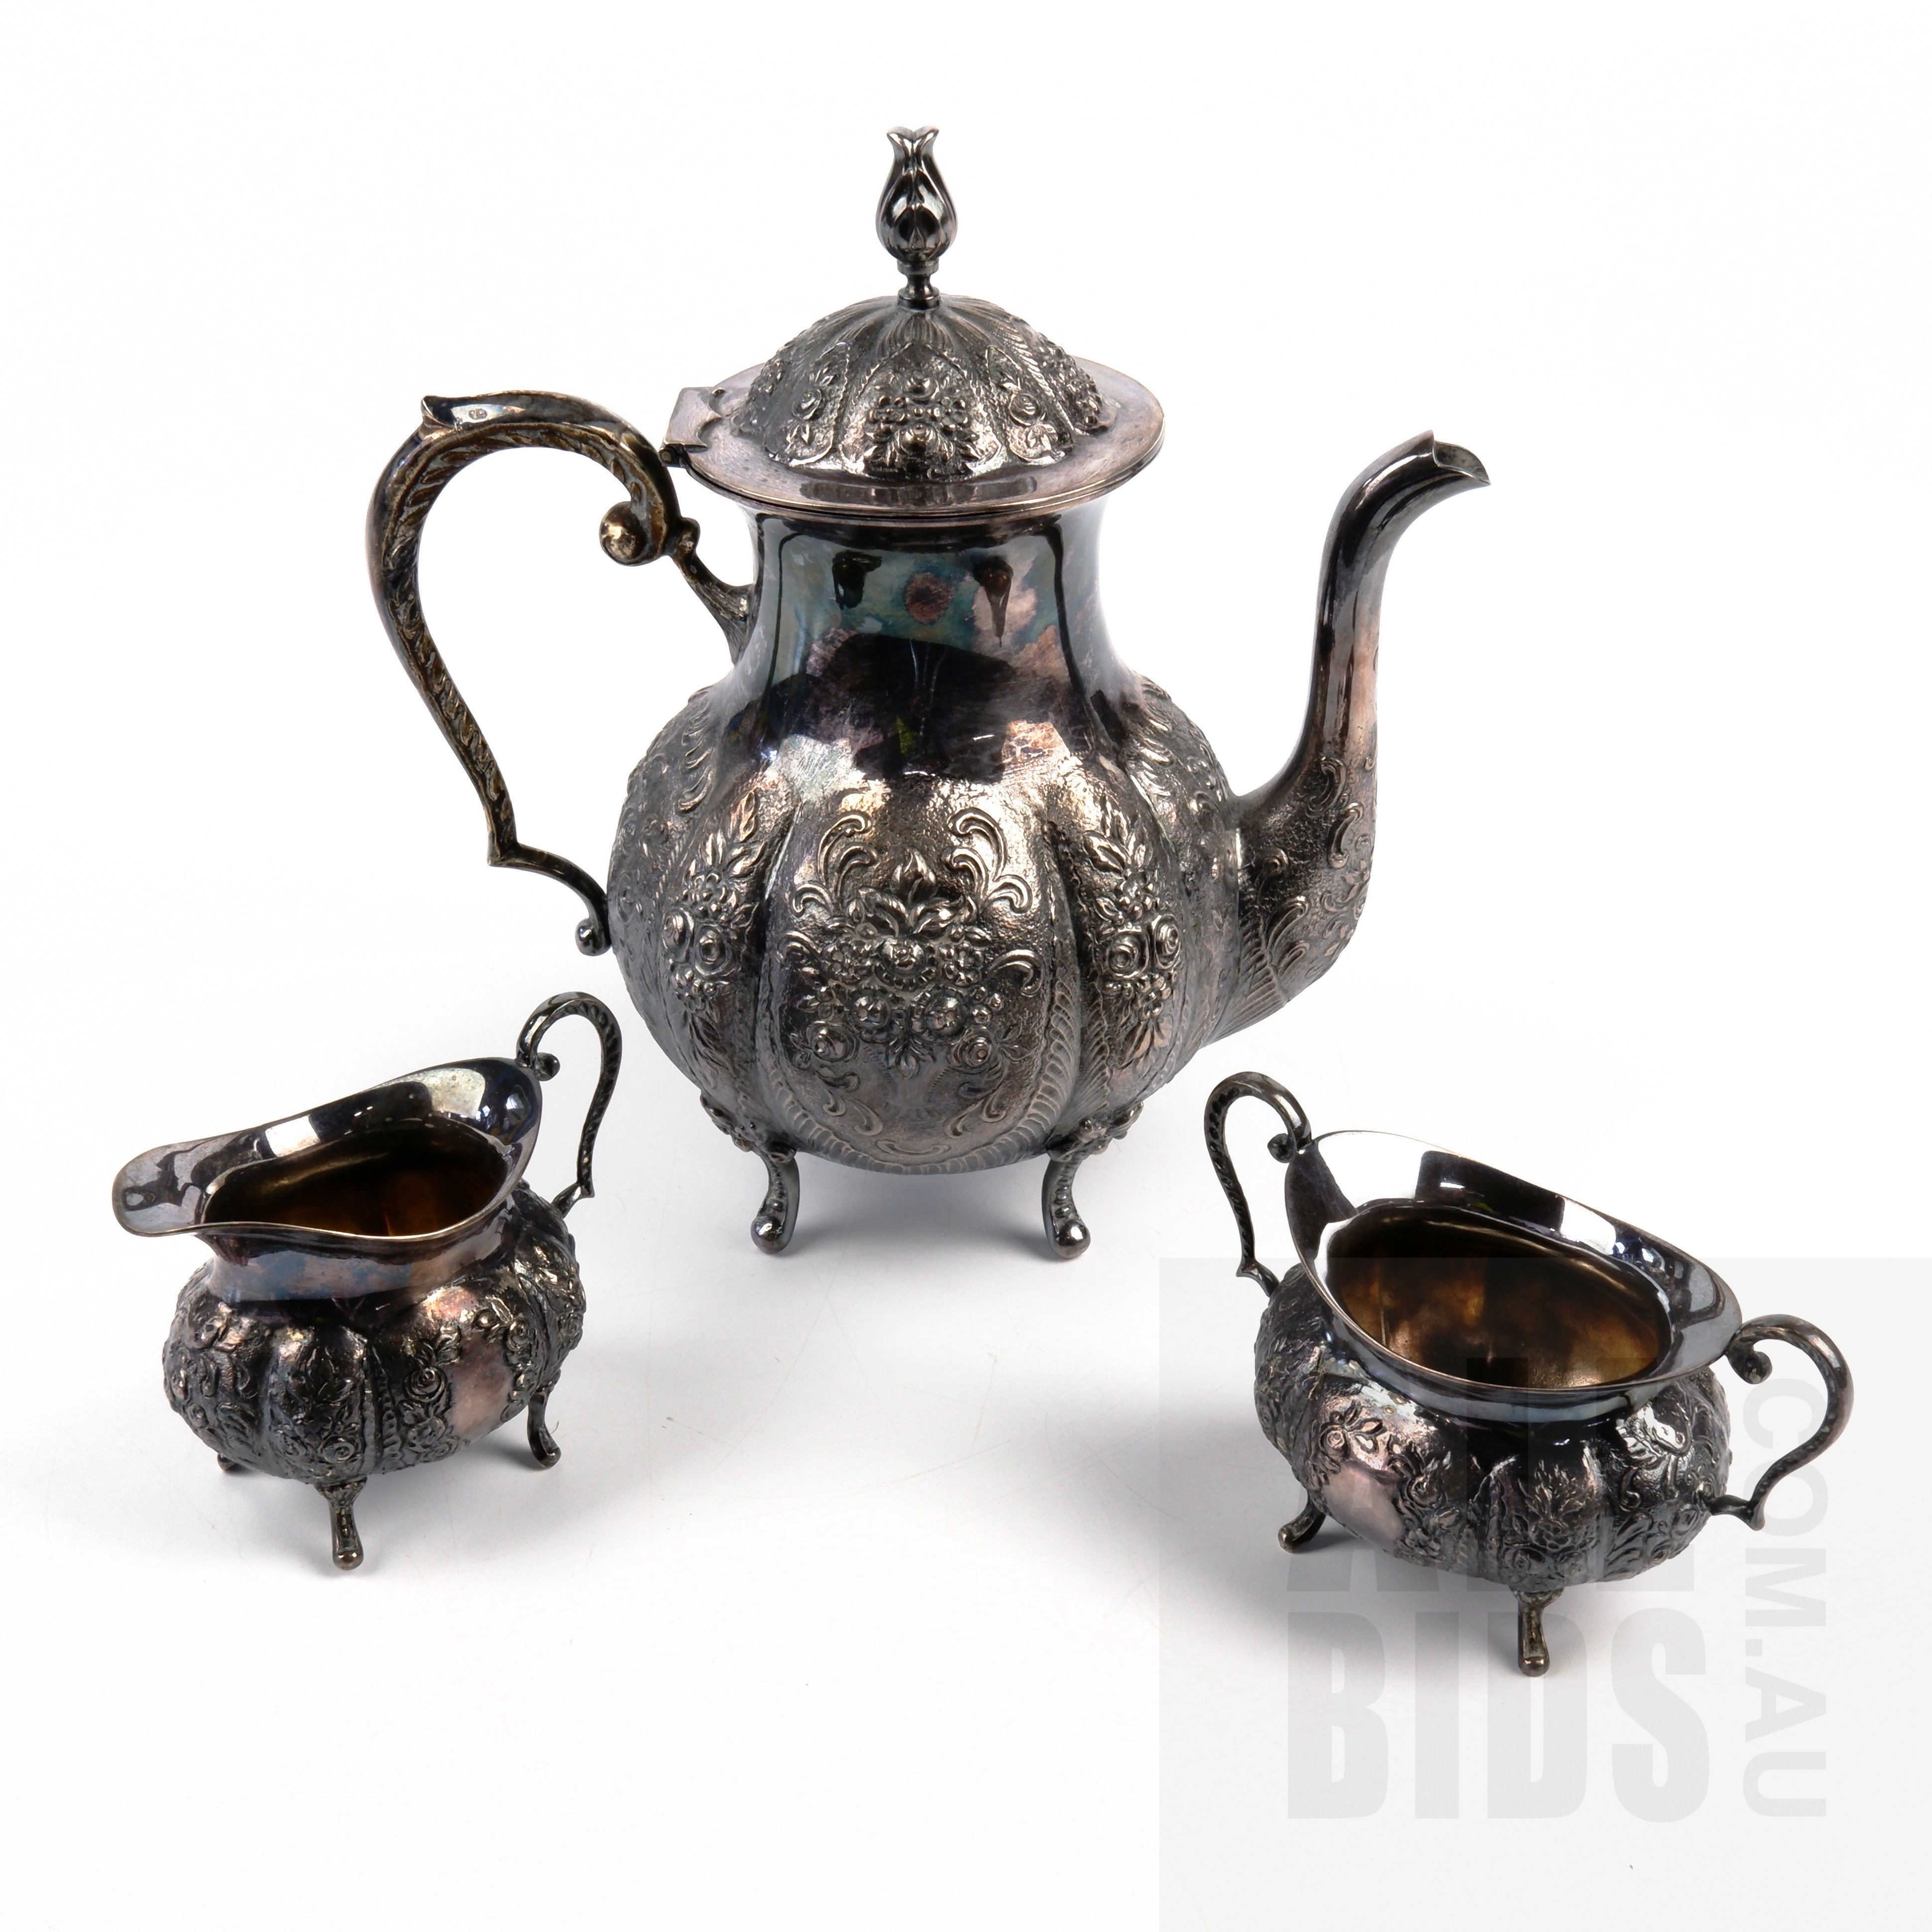 'Finnish Heavily Repoussed .830 Silver Teapot with Matched Creamer Jig and Sugar Bowl, Kultakeskus, 1982, 757g'